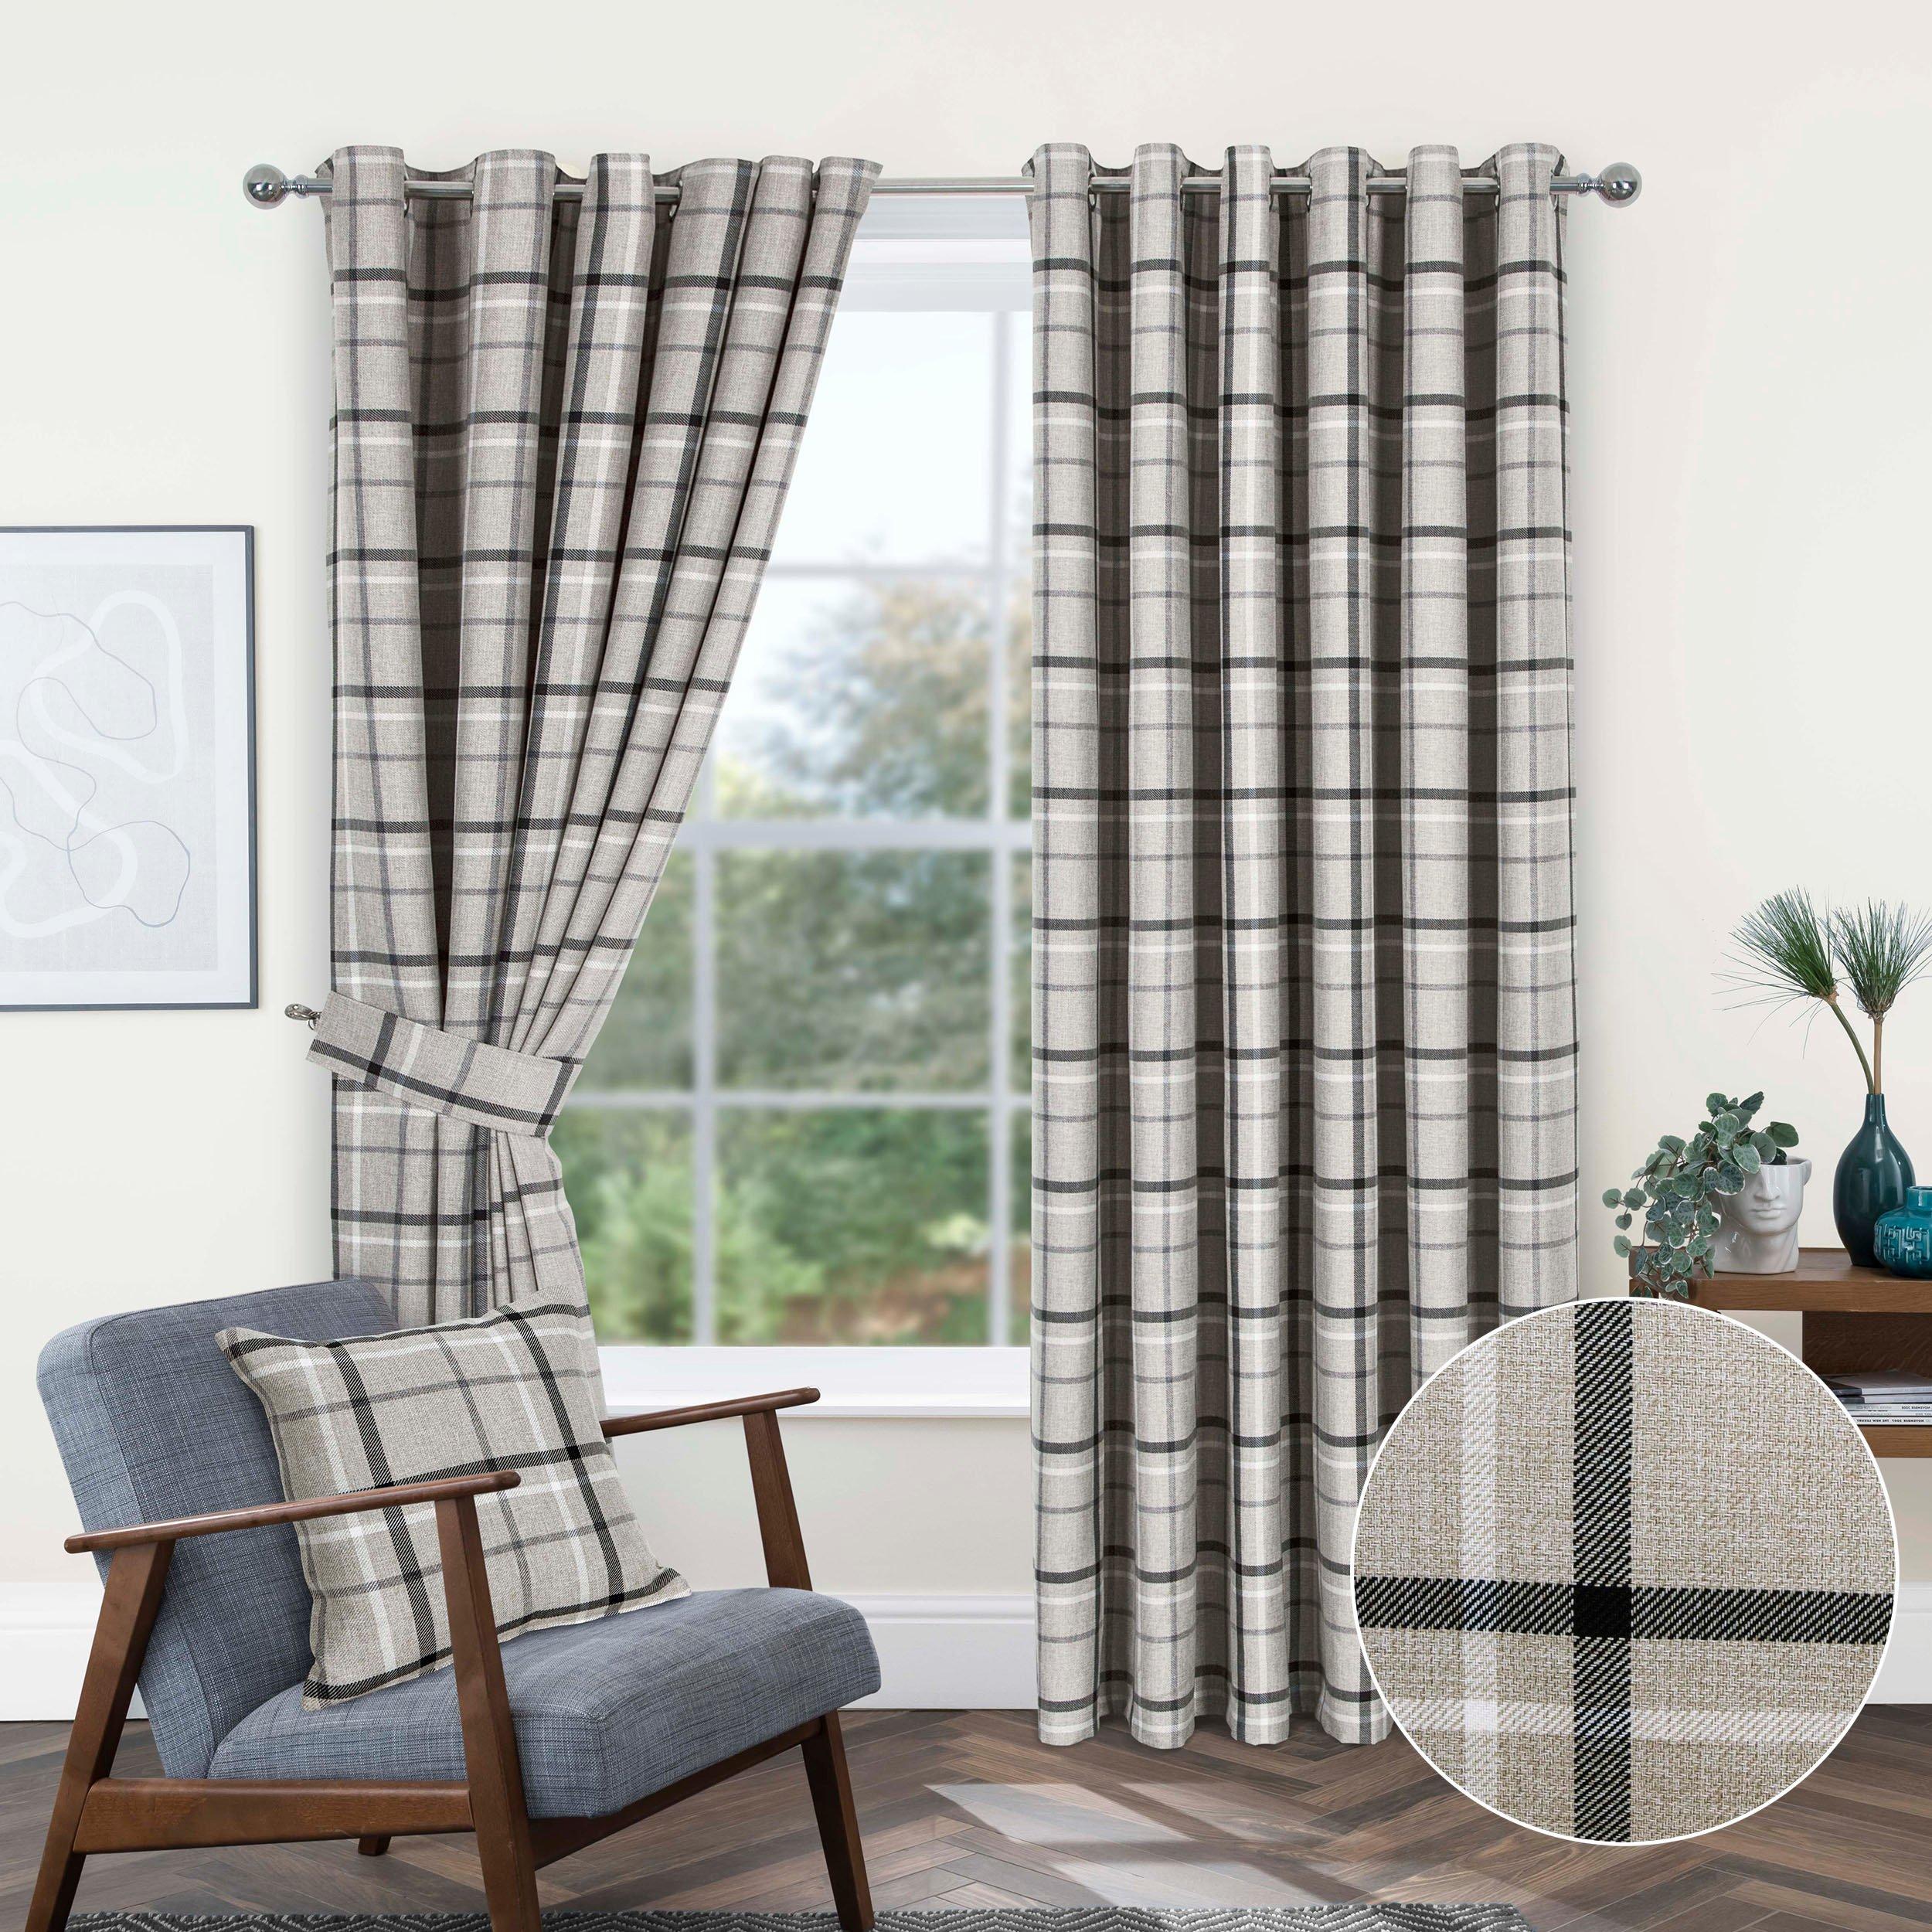 Hudson Woven Check Fully Lined Eyelet Curtains pair